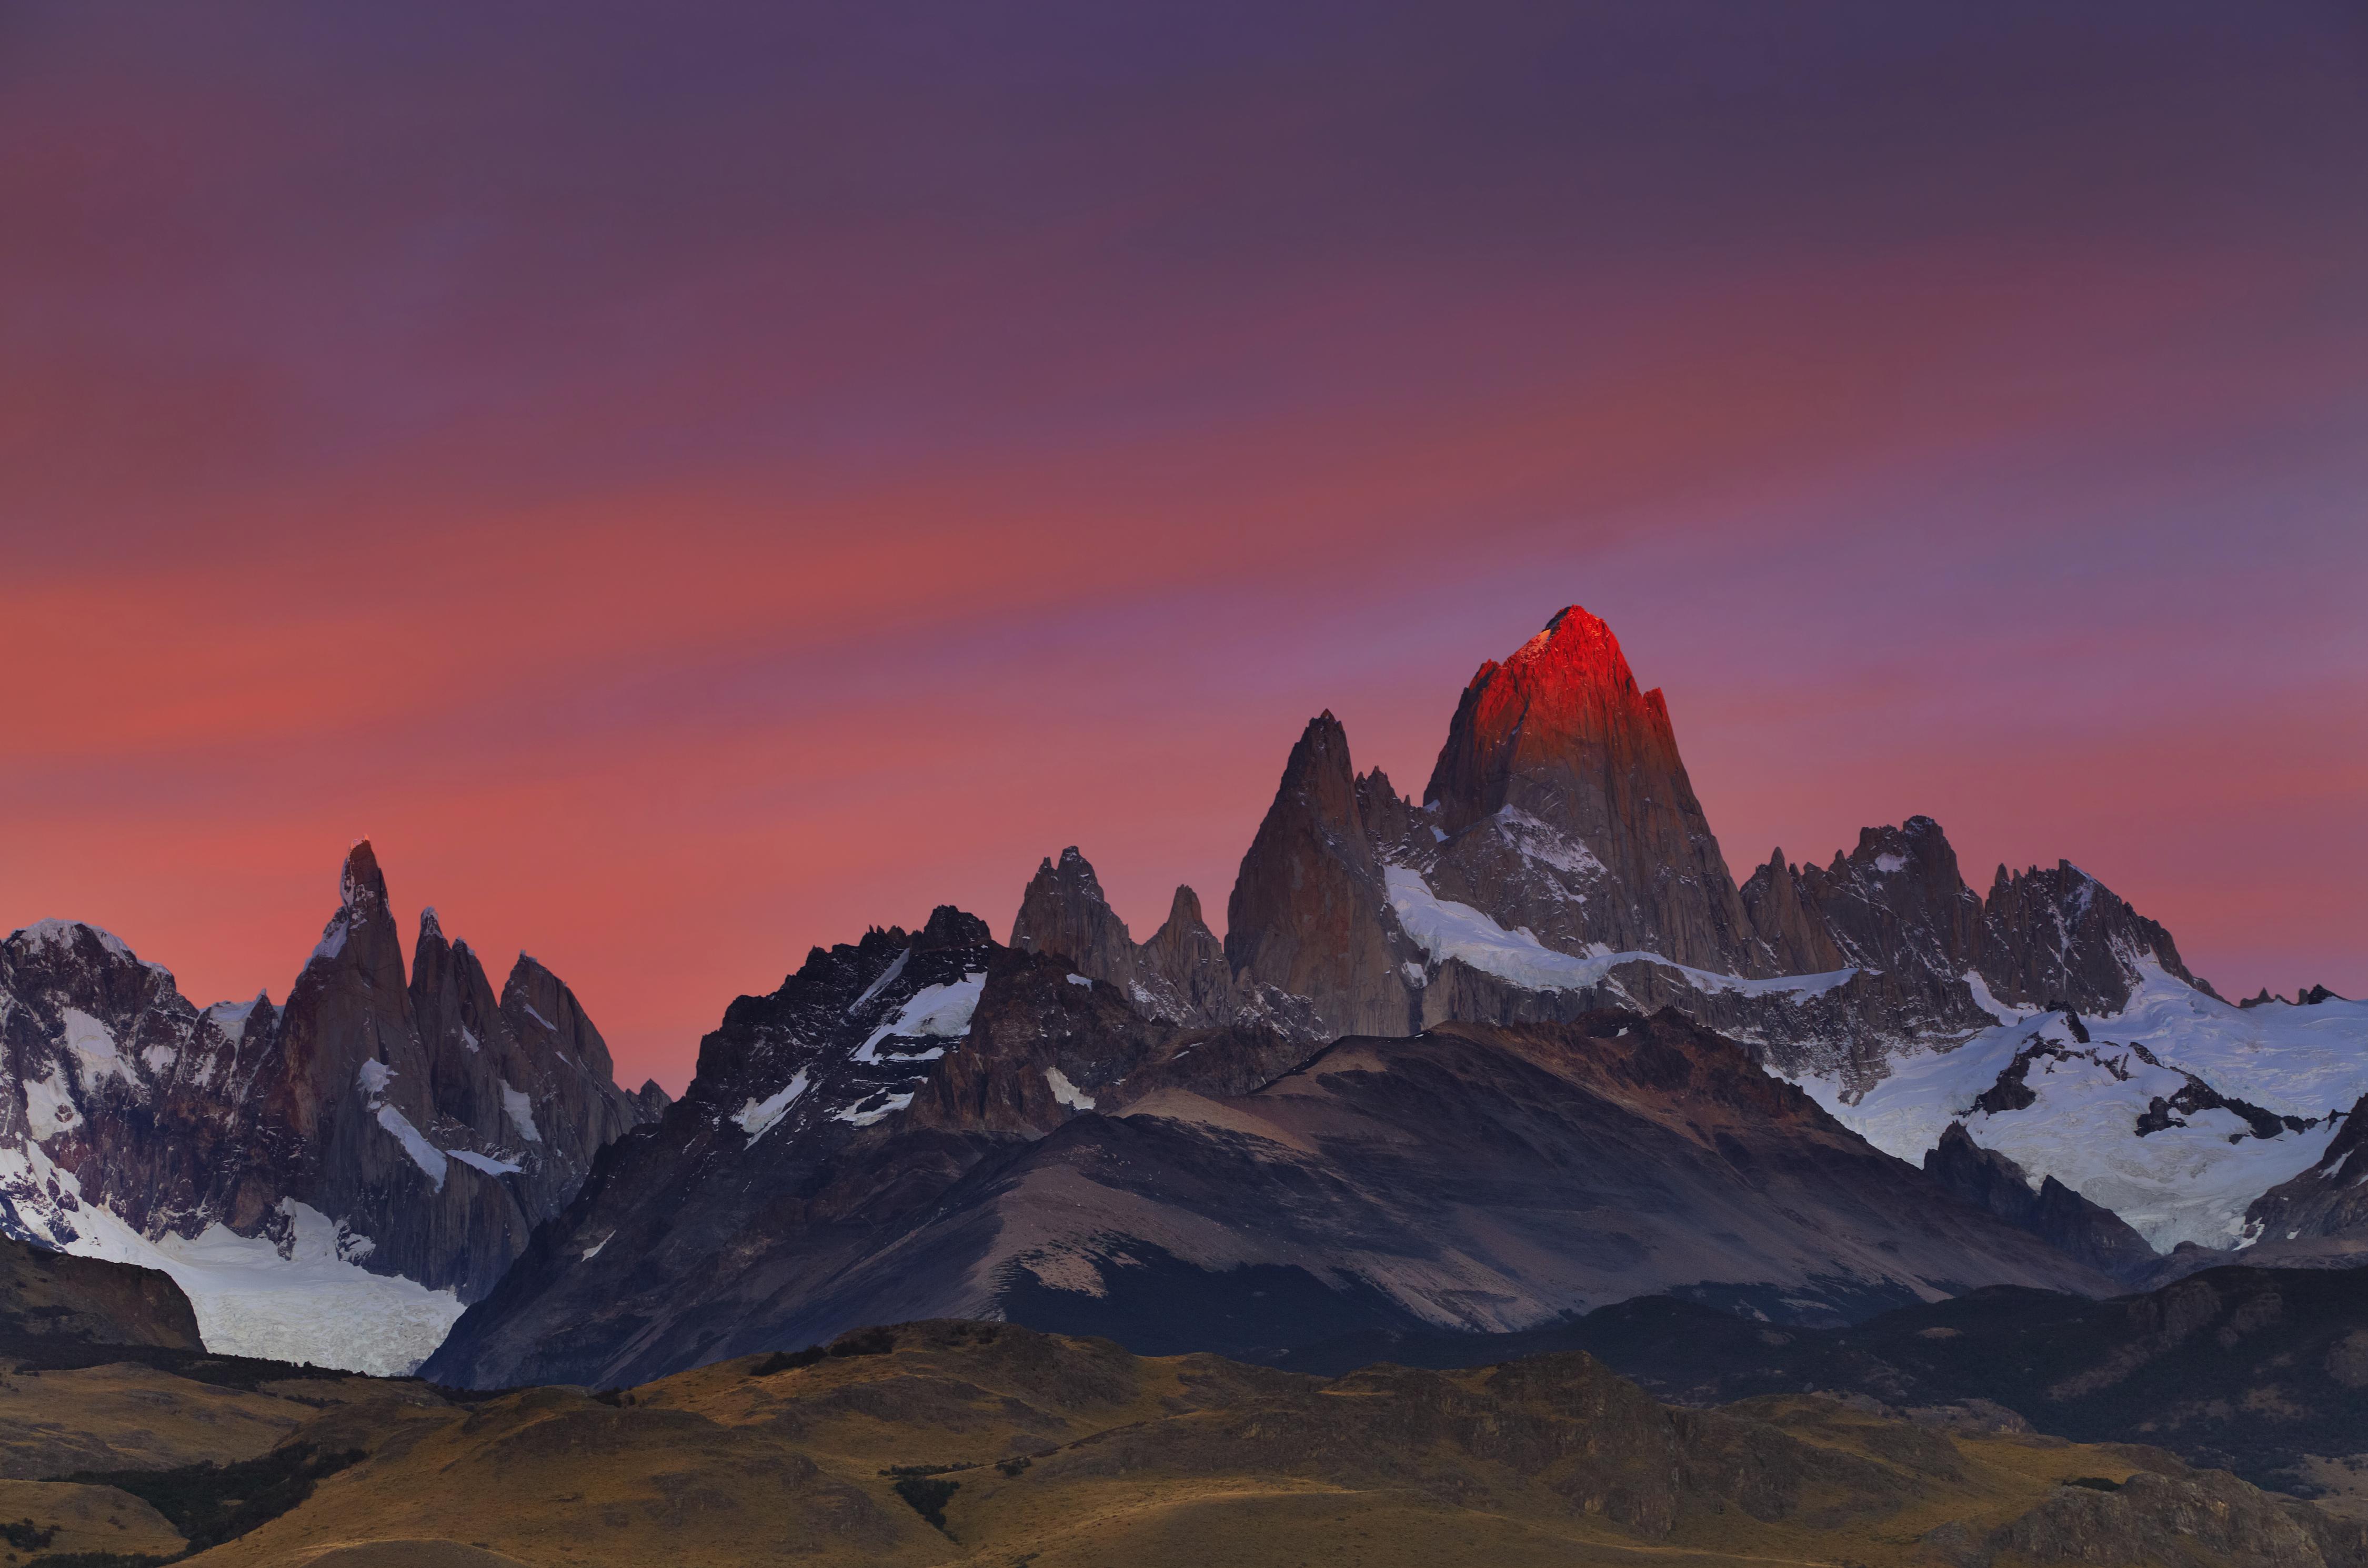 The 10 Best Patagonia Tours & Trips 2018/2019 (with 161 Reviews